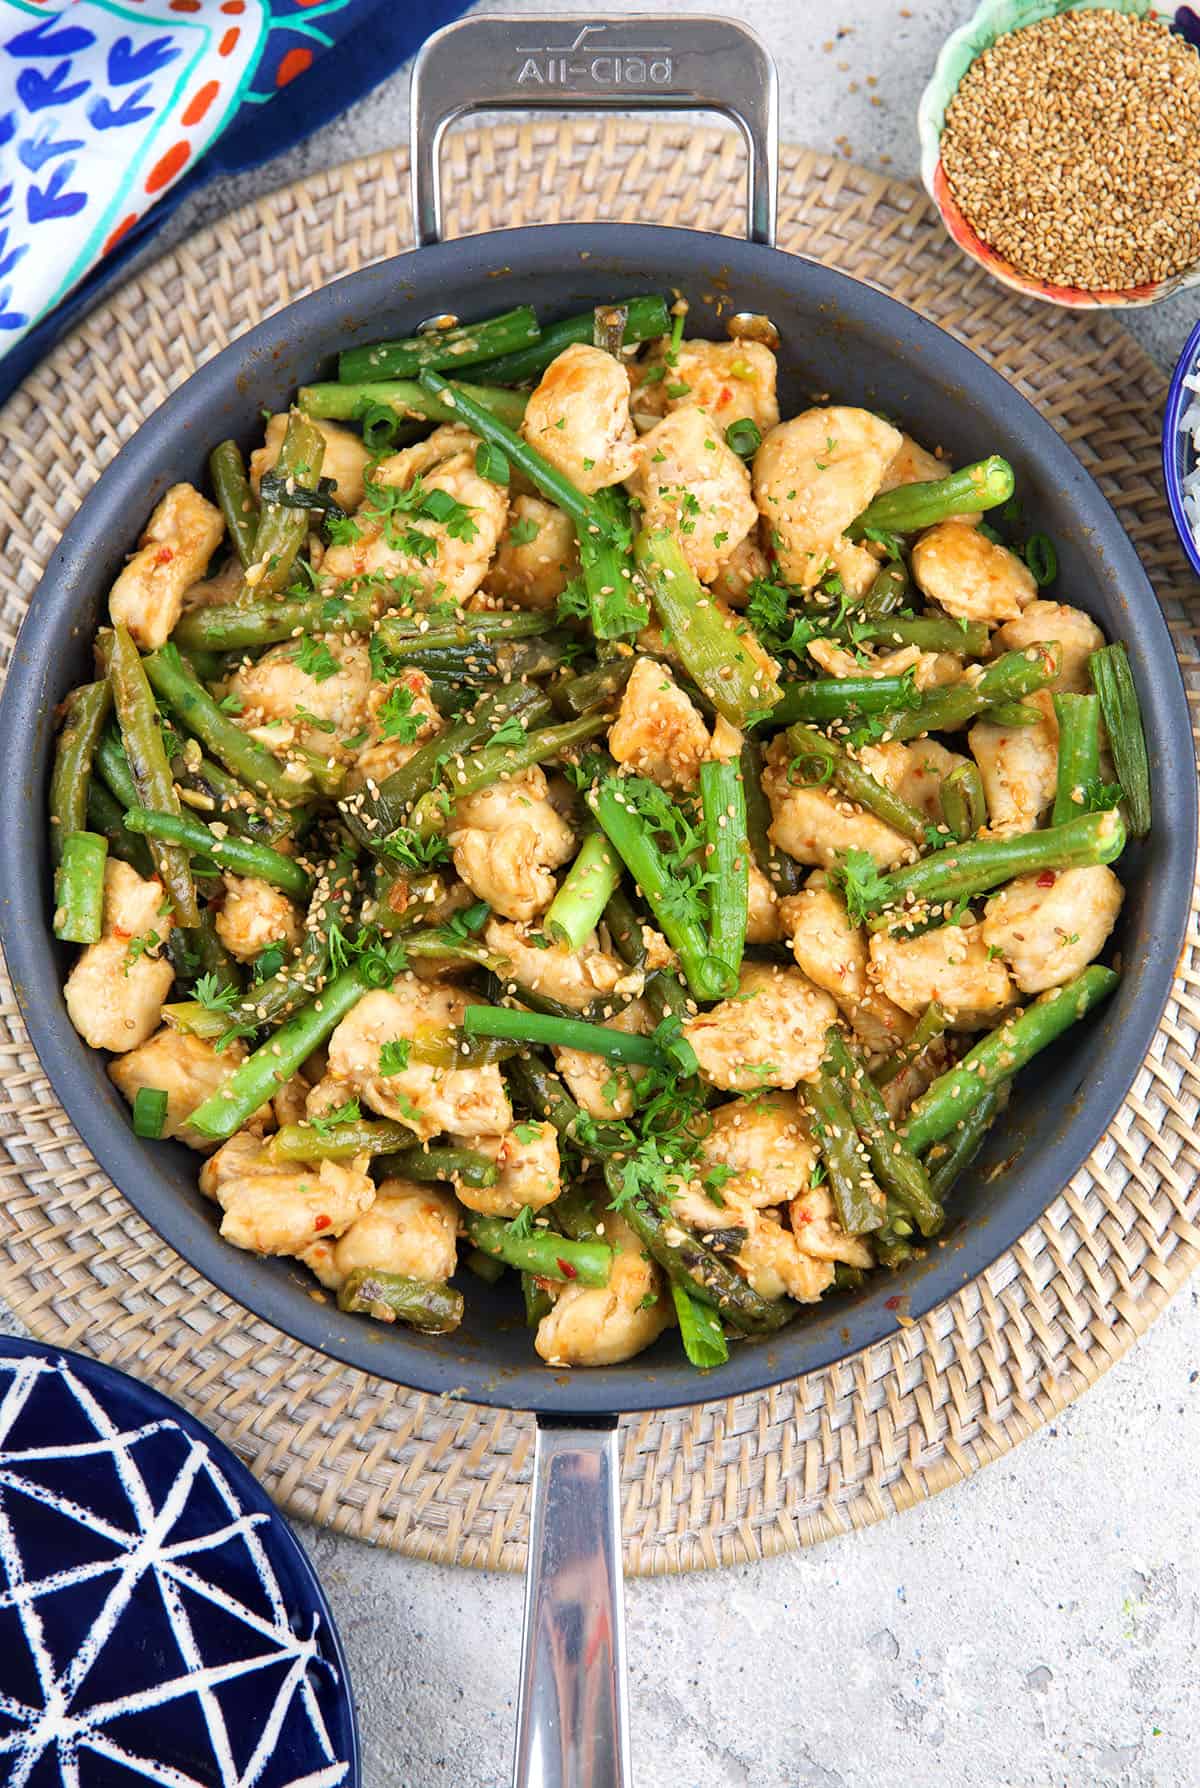 A skillet is filled with green beans, onions, and cooked chicken.